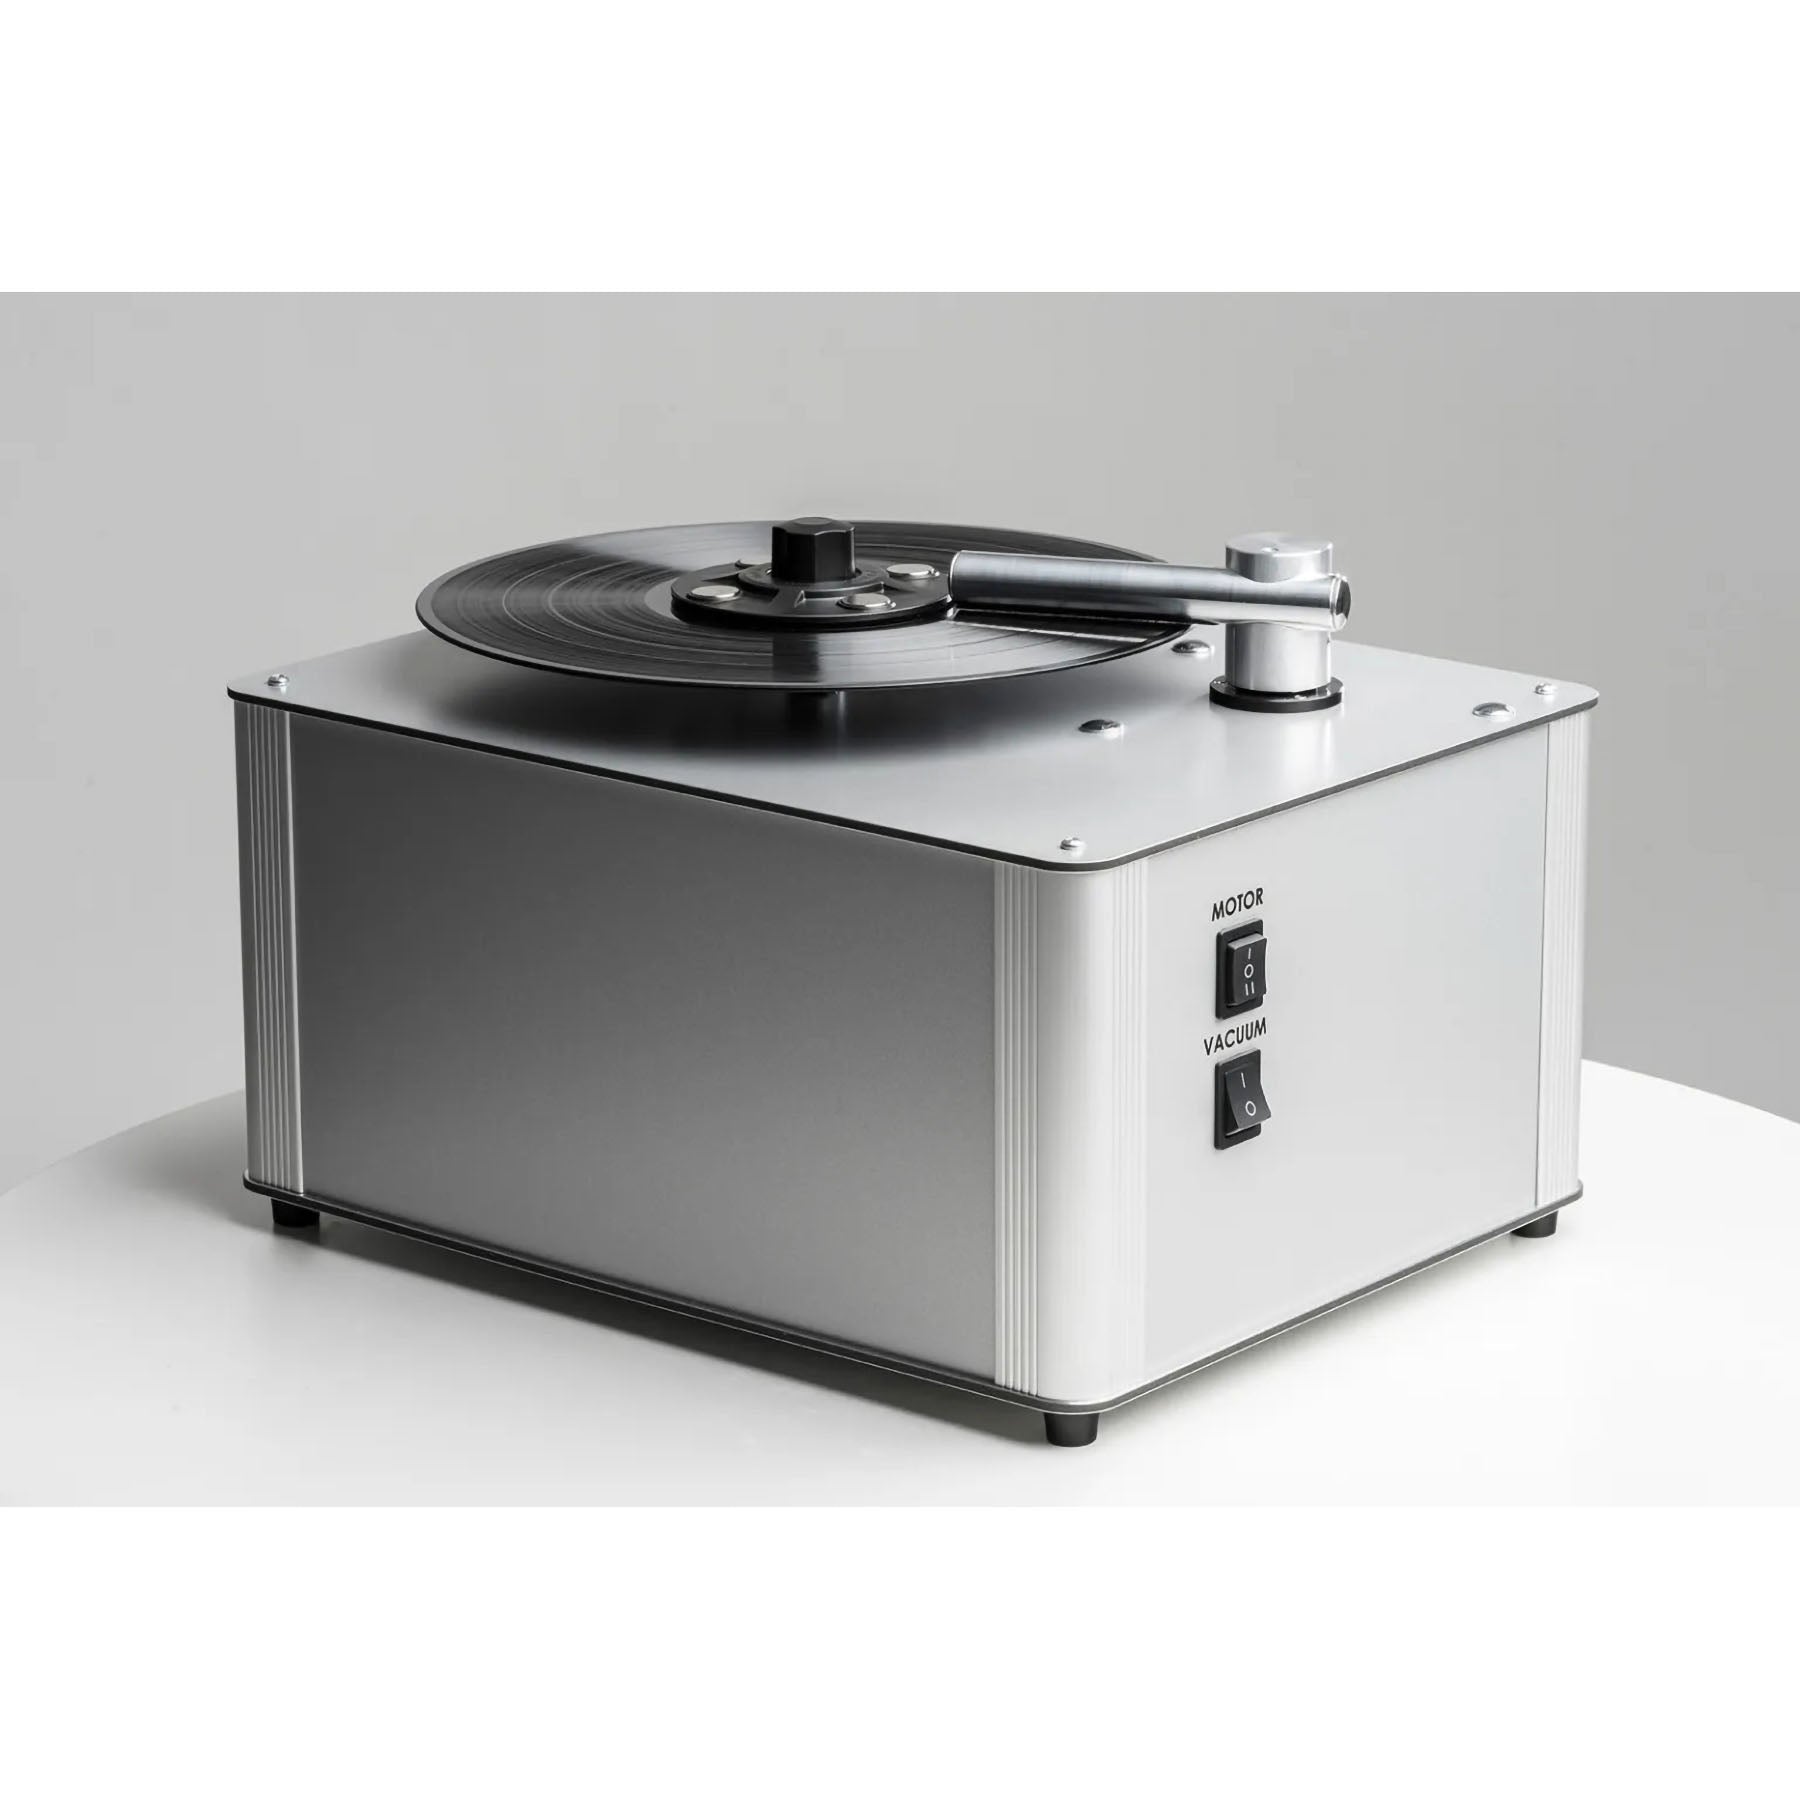 VC-S3 Premium Record Cleaning Machine for Vinyl and Shellac Records